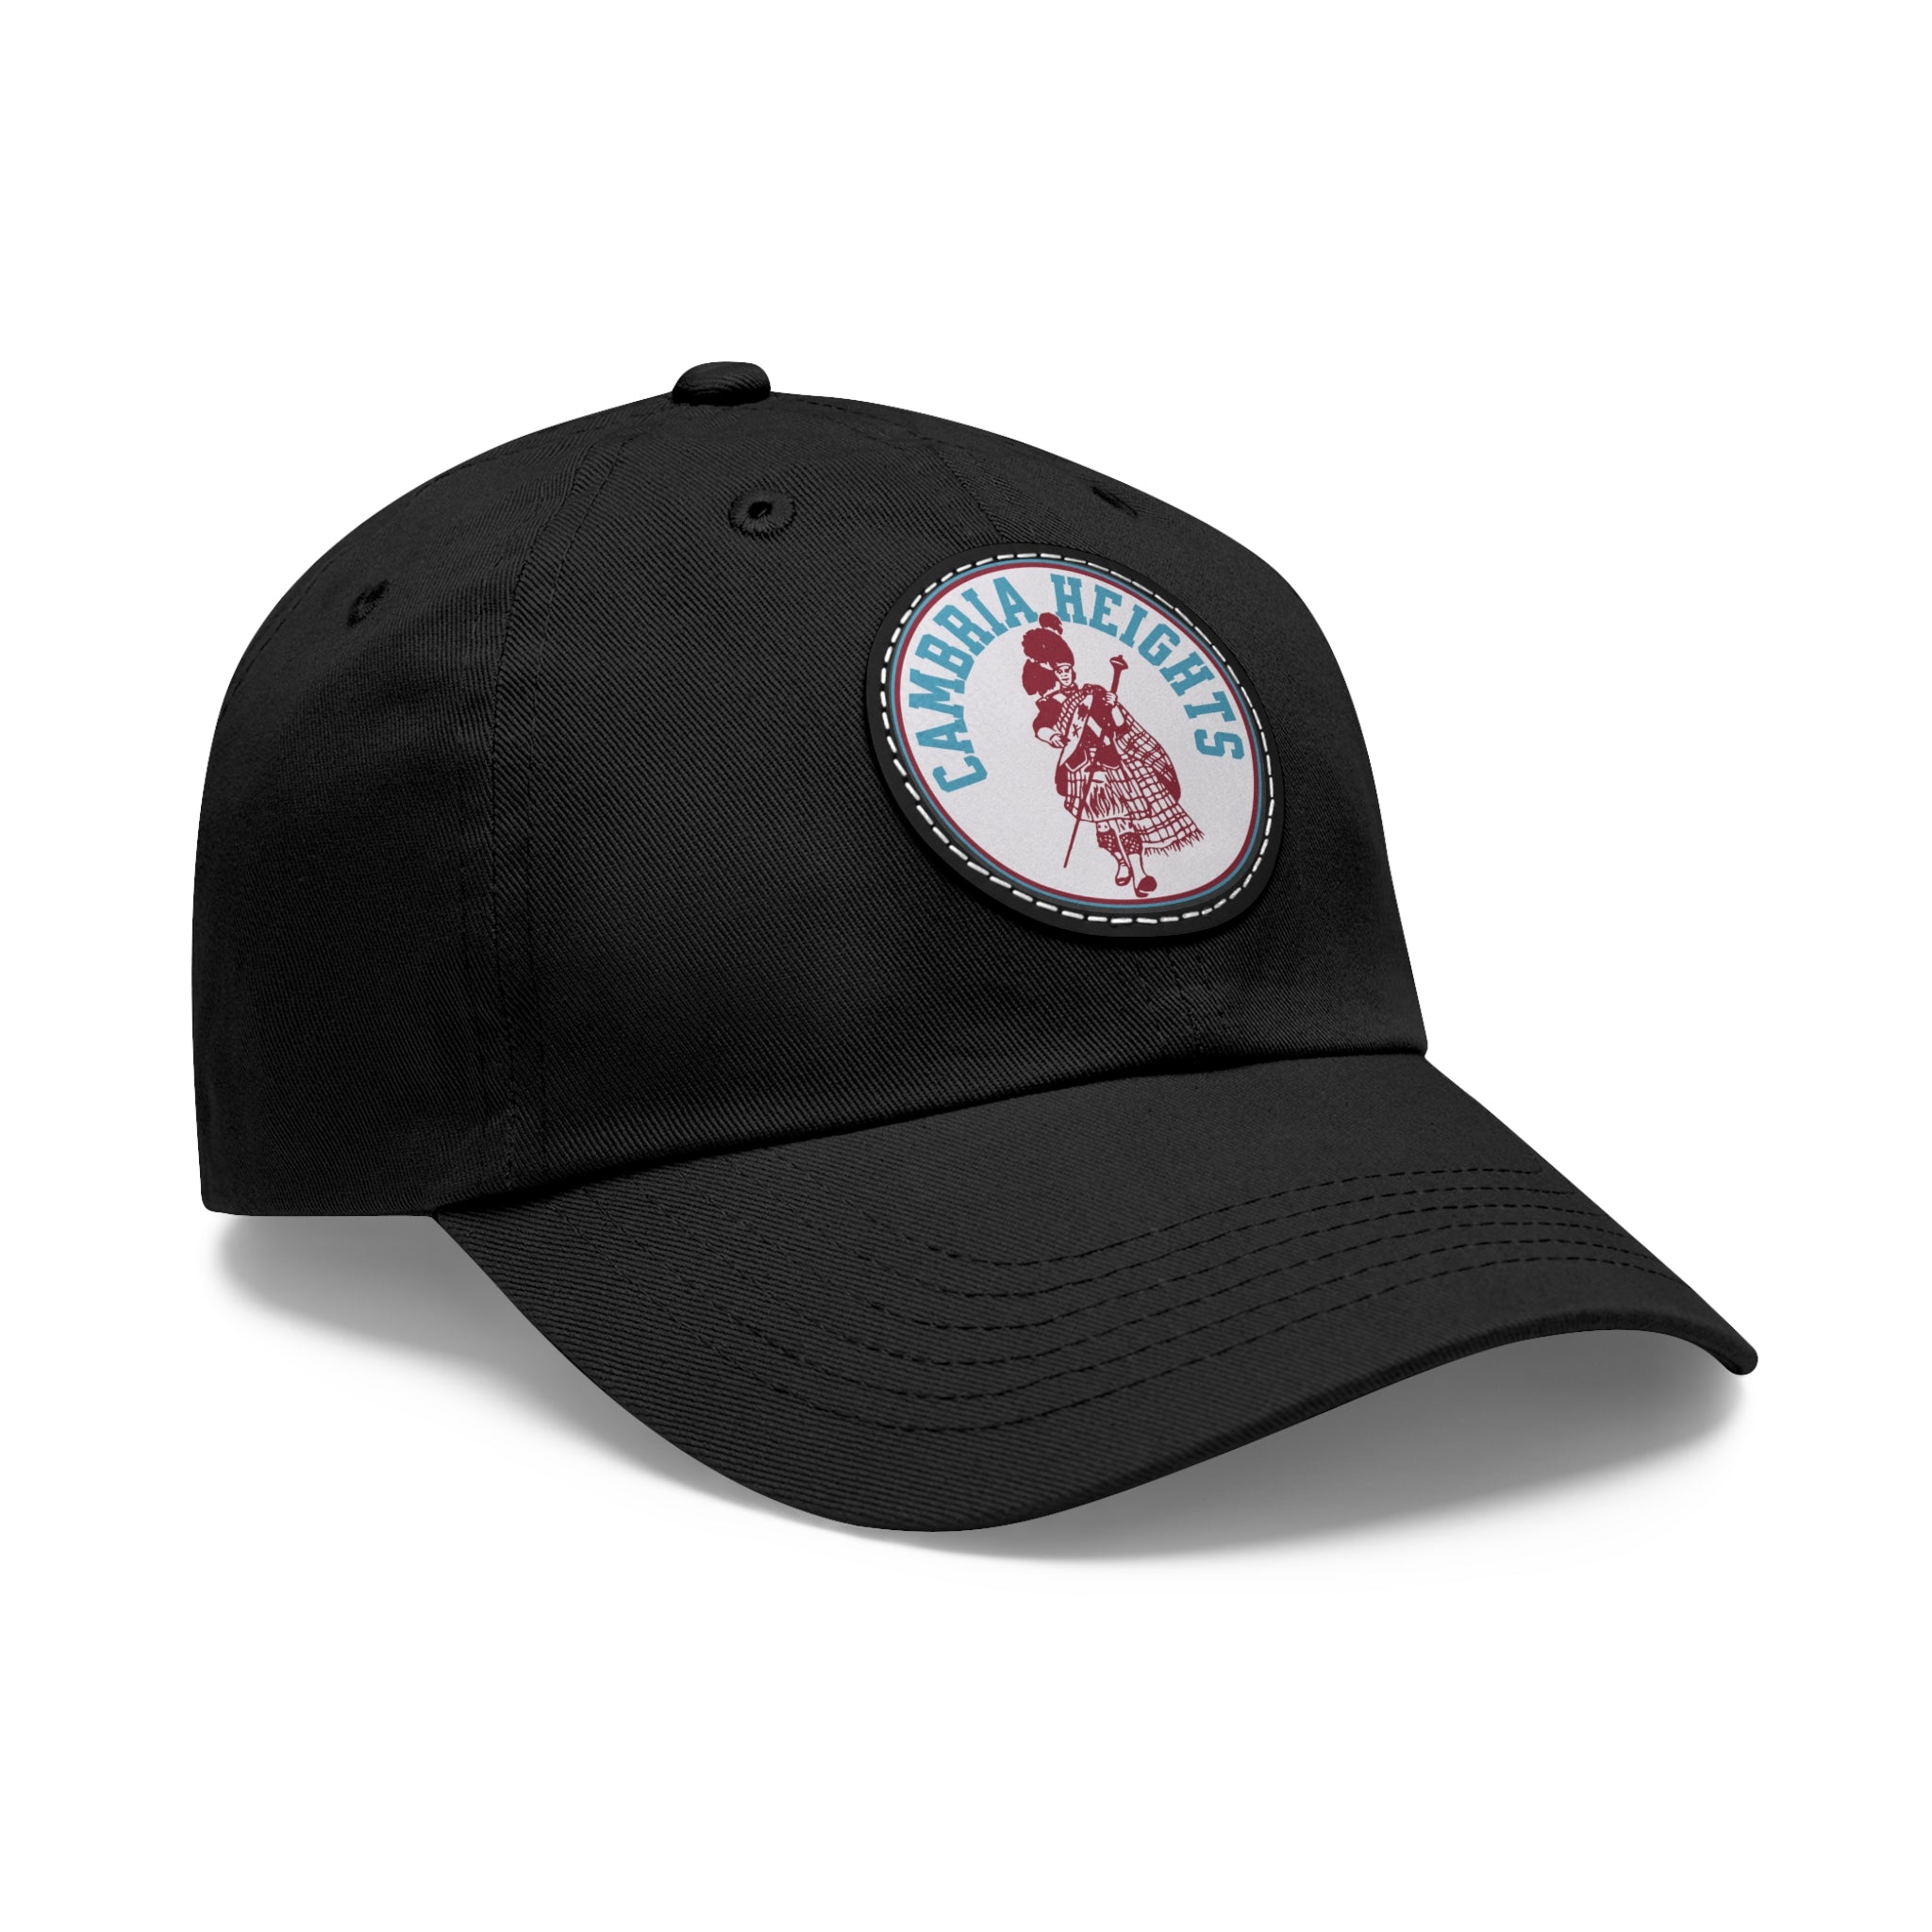 Cambria Heights Retro - Printed Patch Hat - Yinzylvania